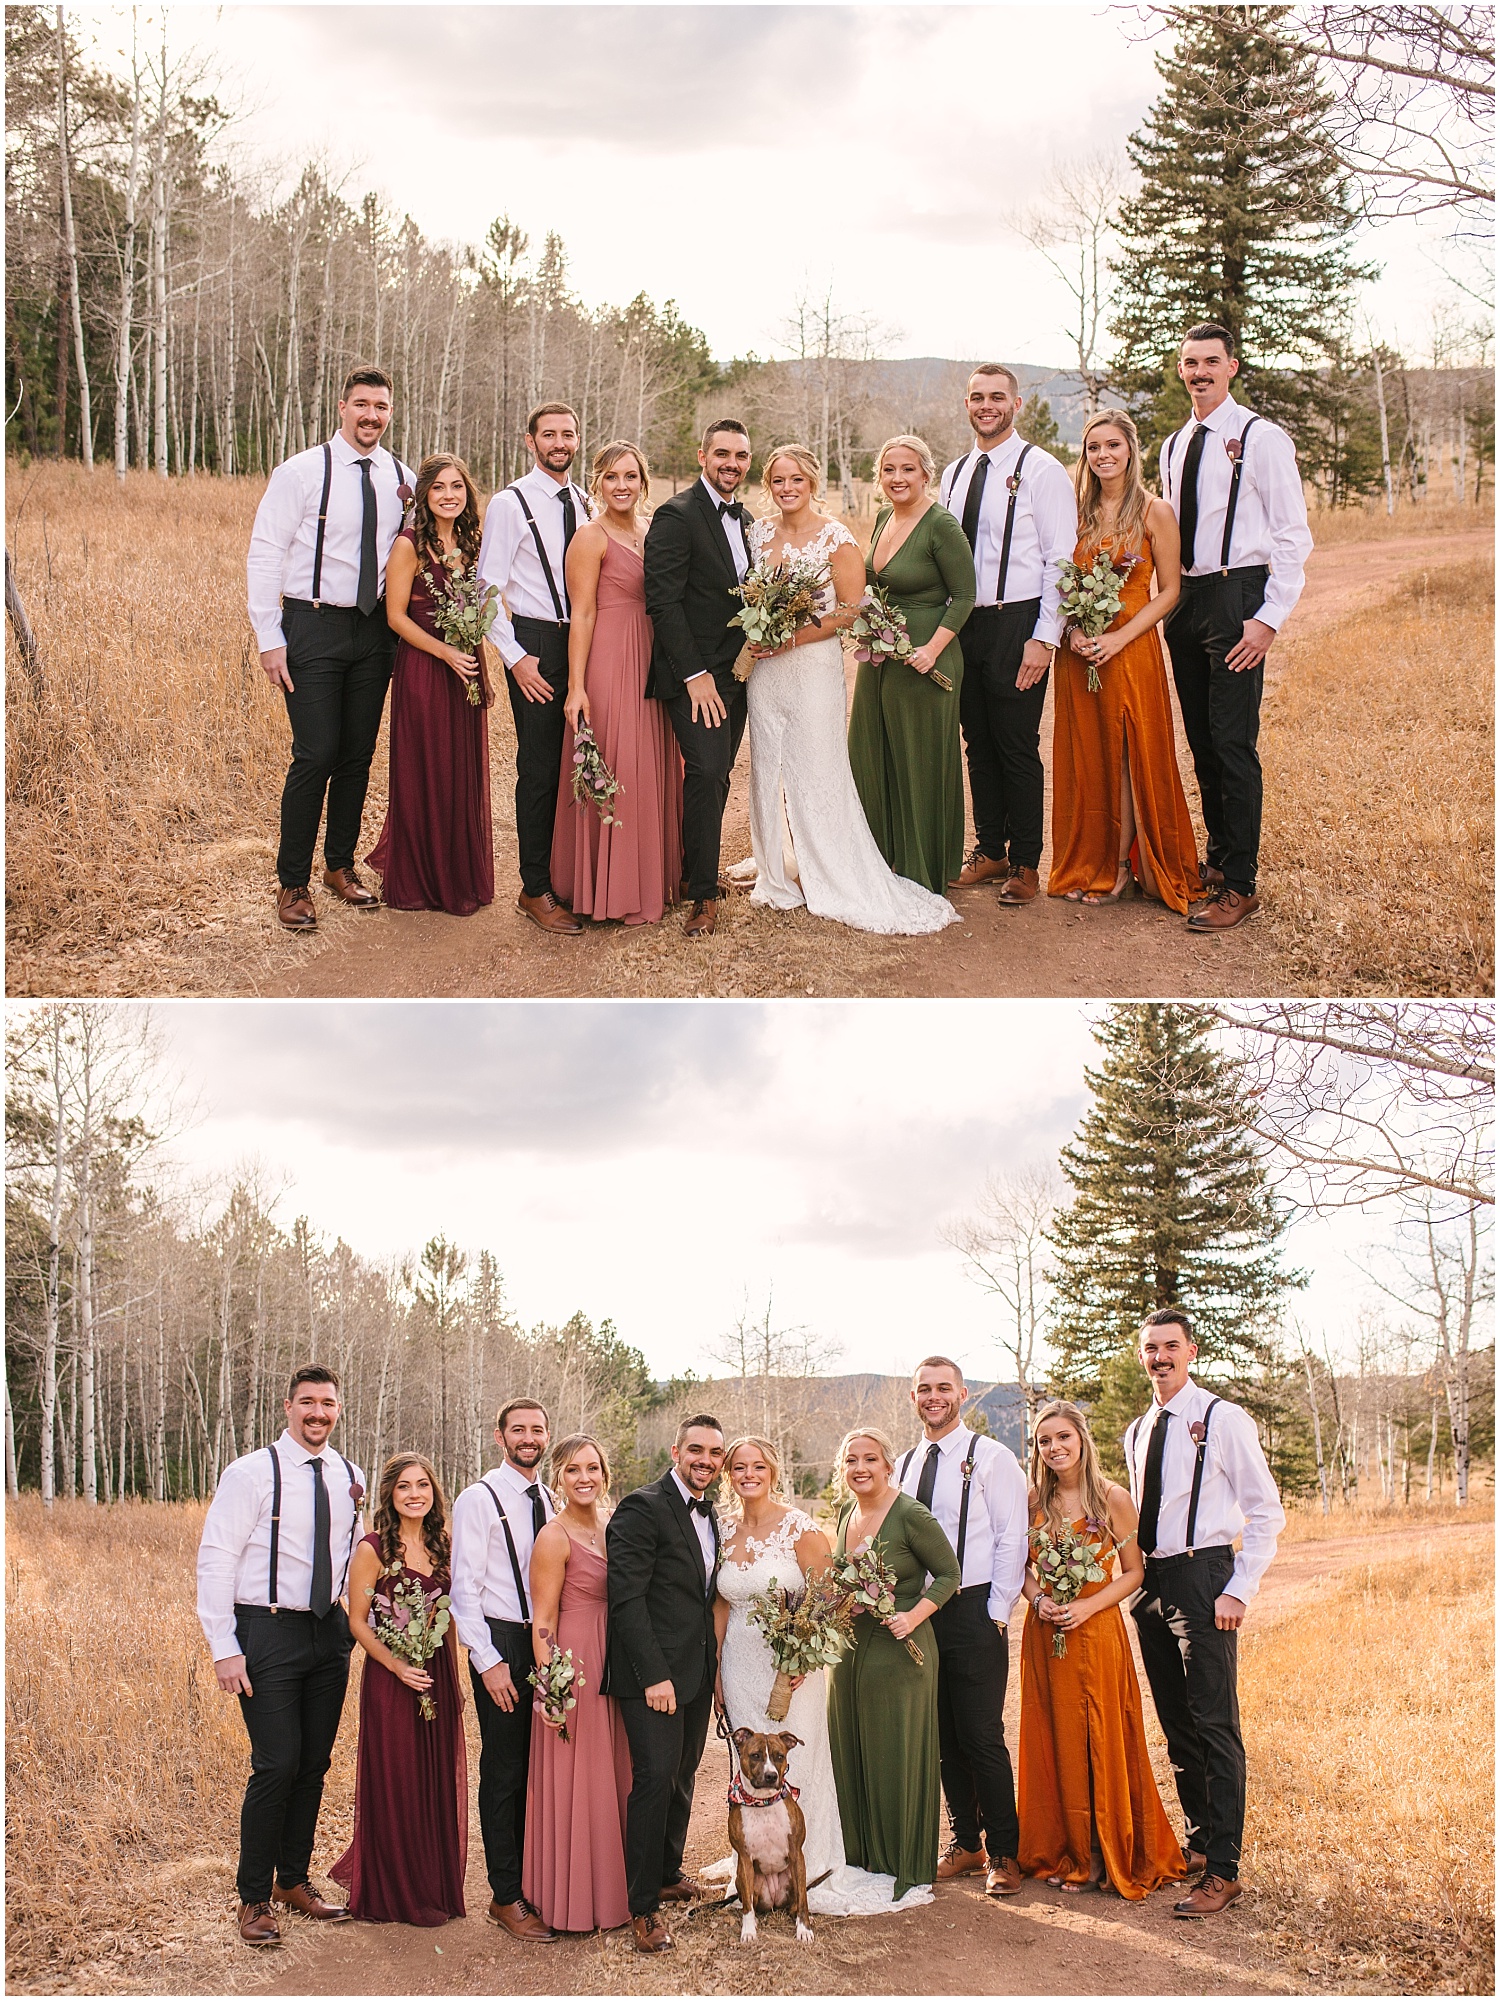 Mismatched fall wedding party colors for late November wedding in Woodland Park Colorado